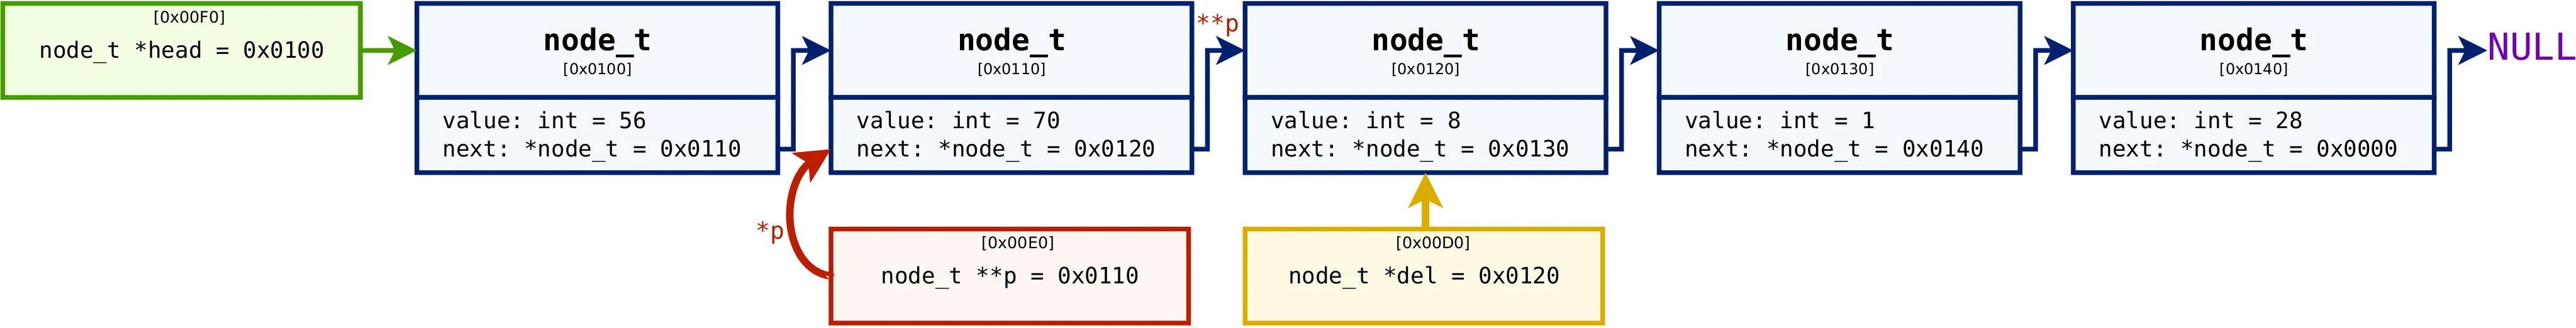 Singly-linked list example #5